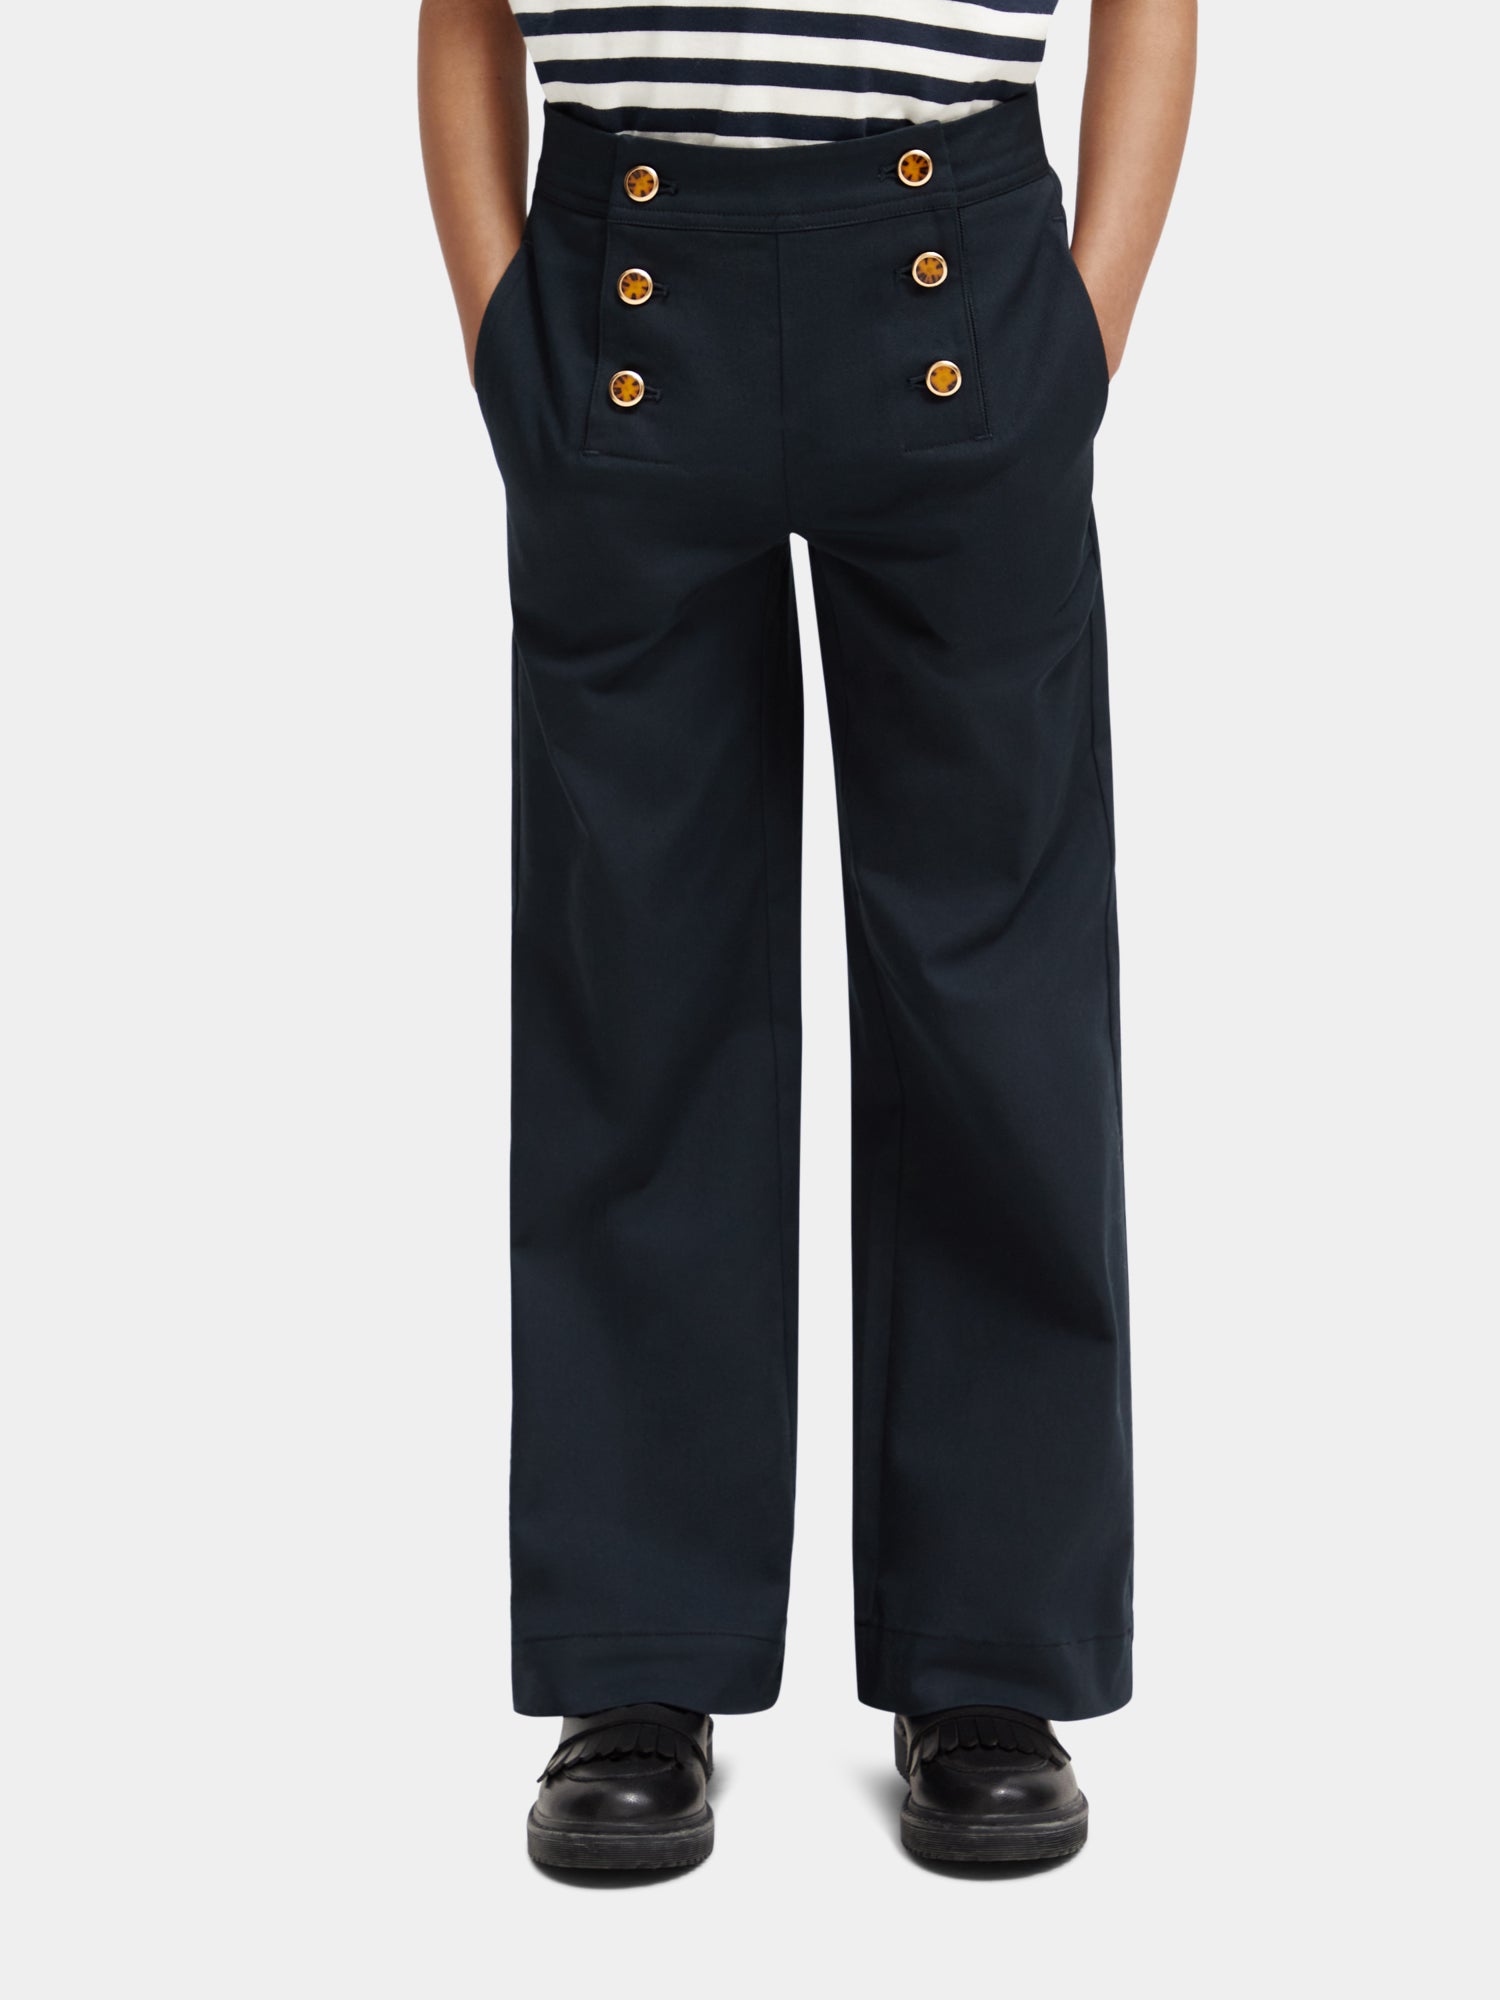 The Wide Leg Sailor Pant in Chambray